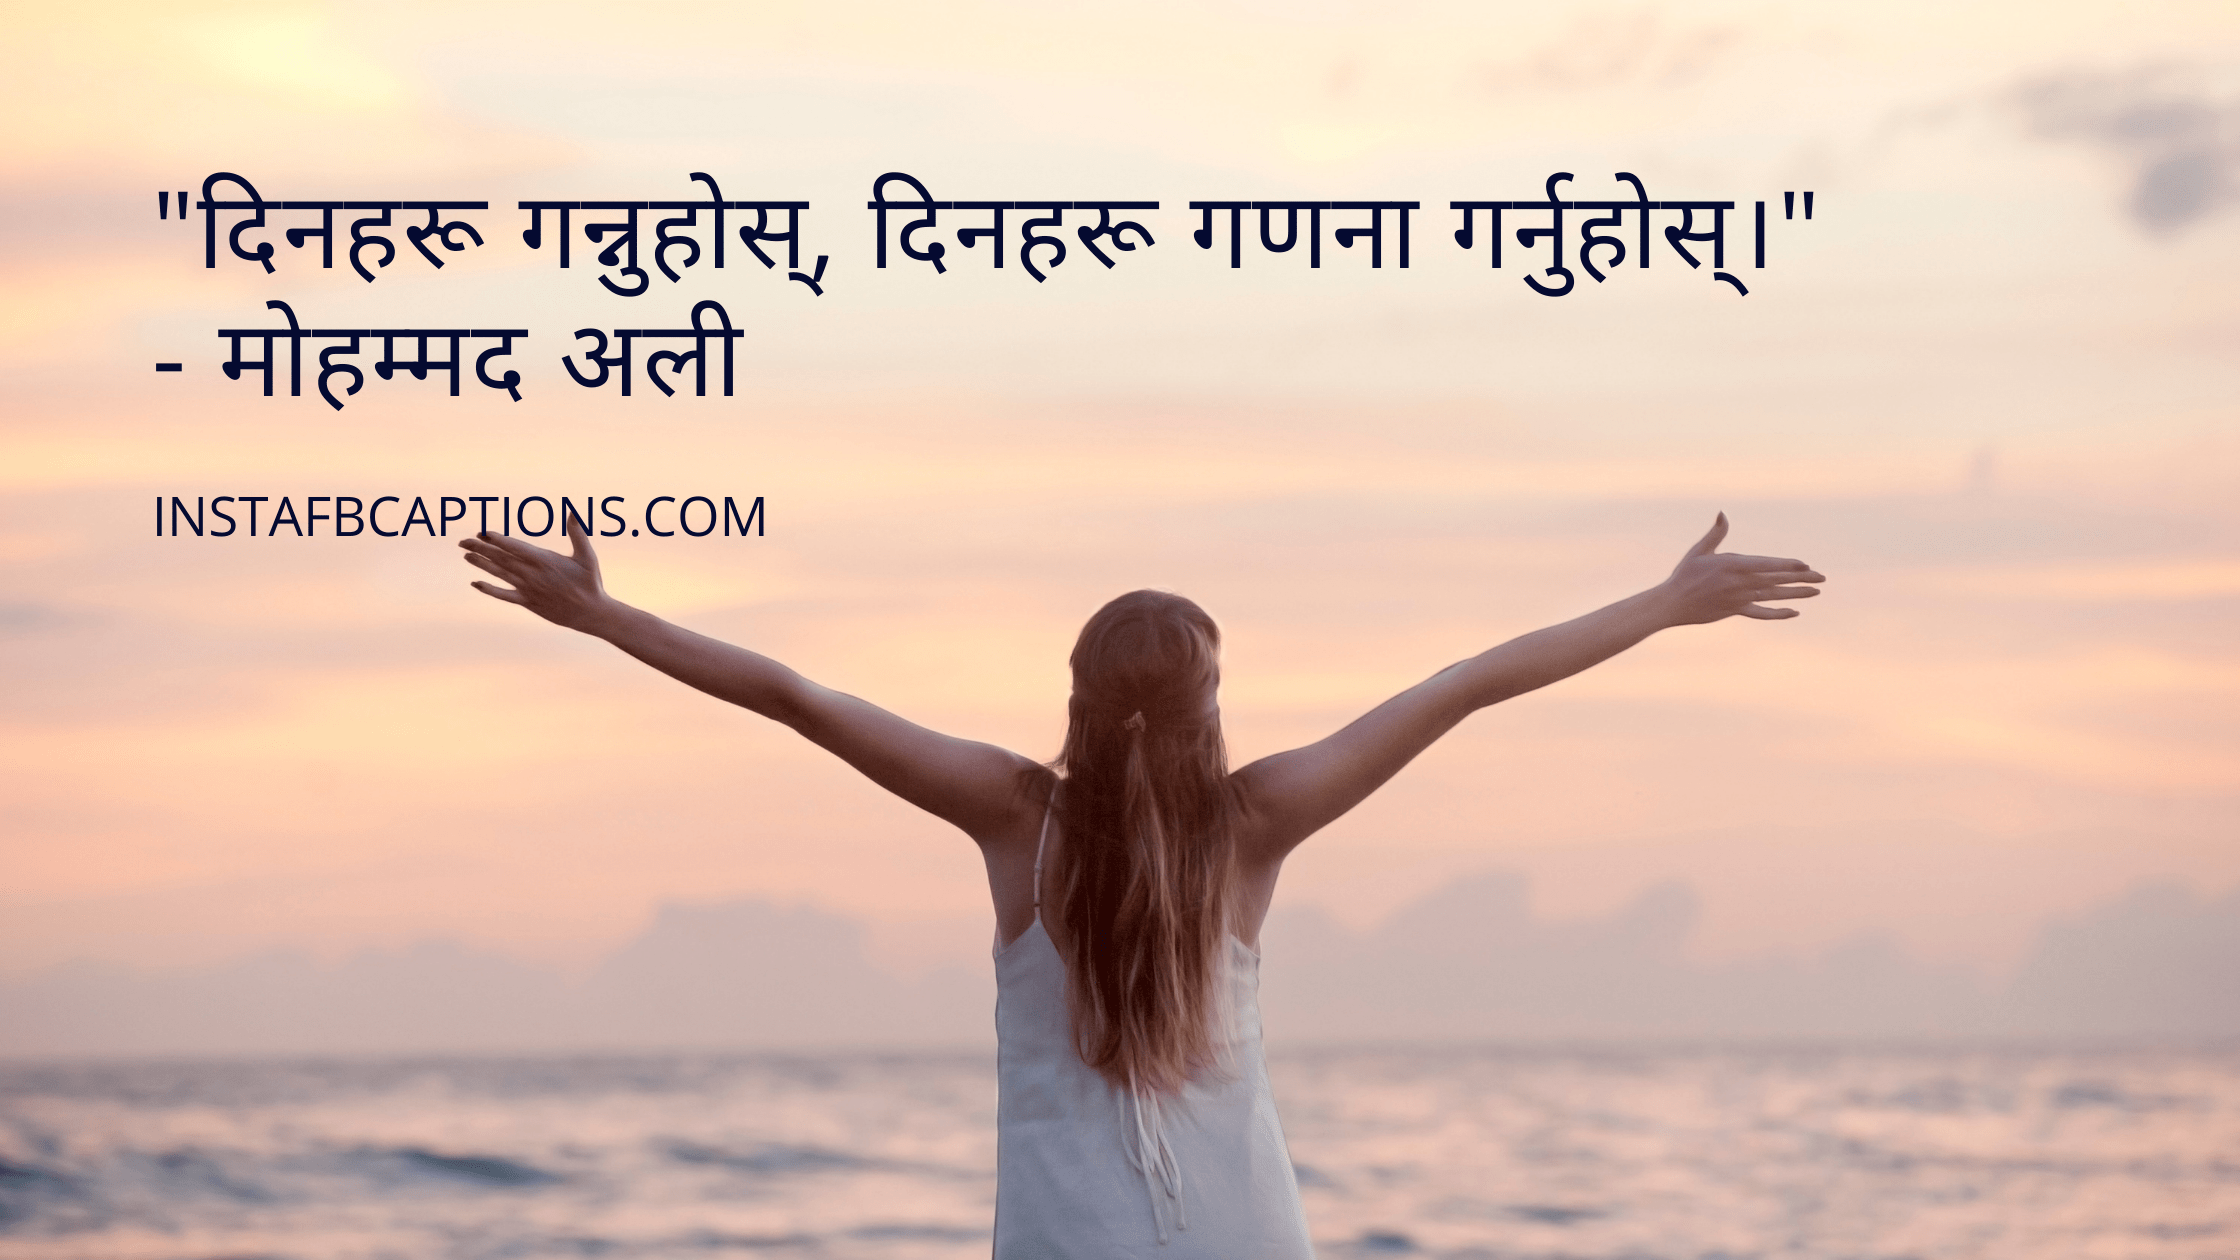 Motivational Nepali Quotes  - Motivational Nepali Quotes  - 99+ Instagram Captions in NEPALI in 2023